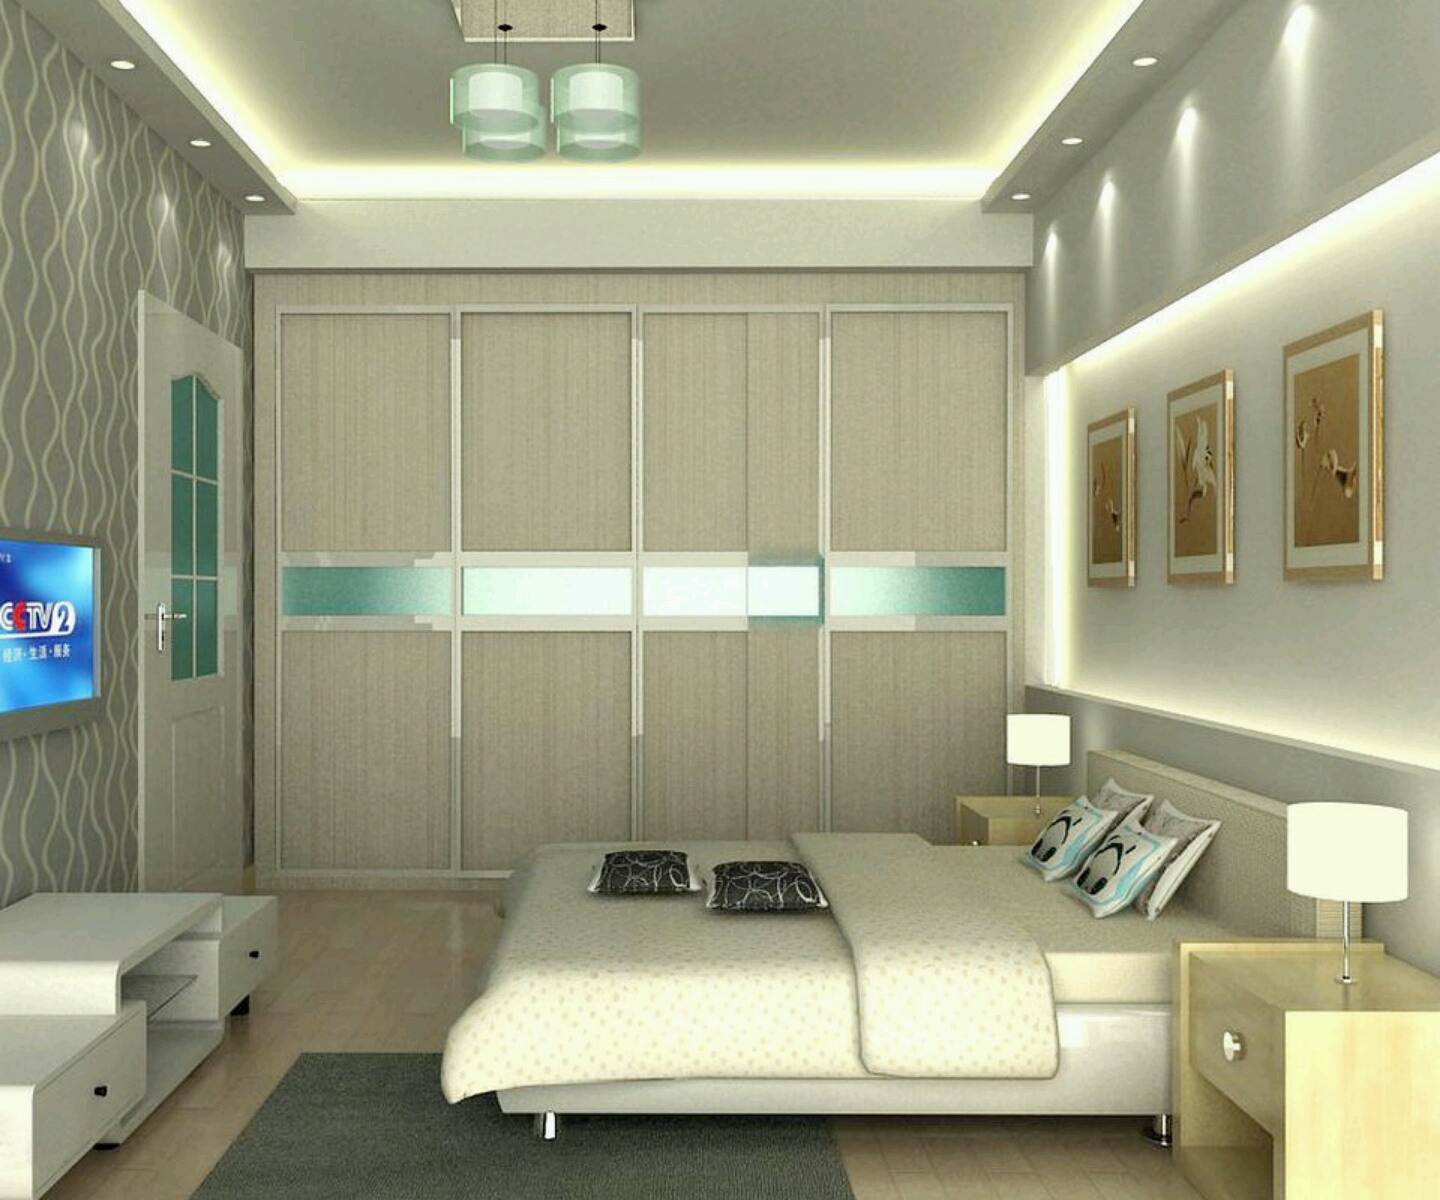 New home designs latest.: Modern homes bedrooms designs best bedrooms designs ideas.